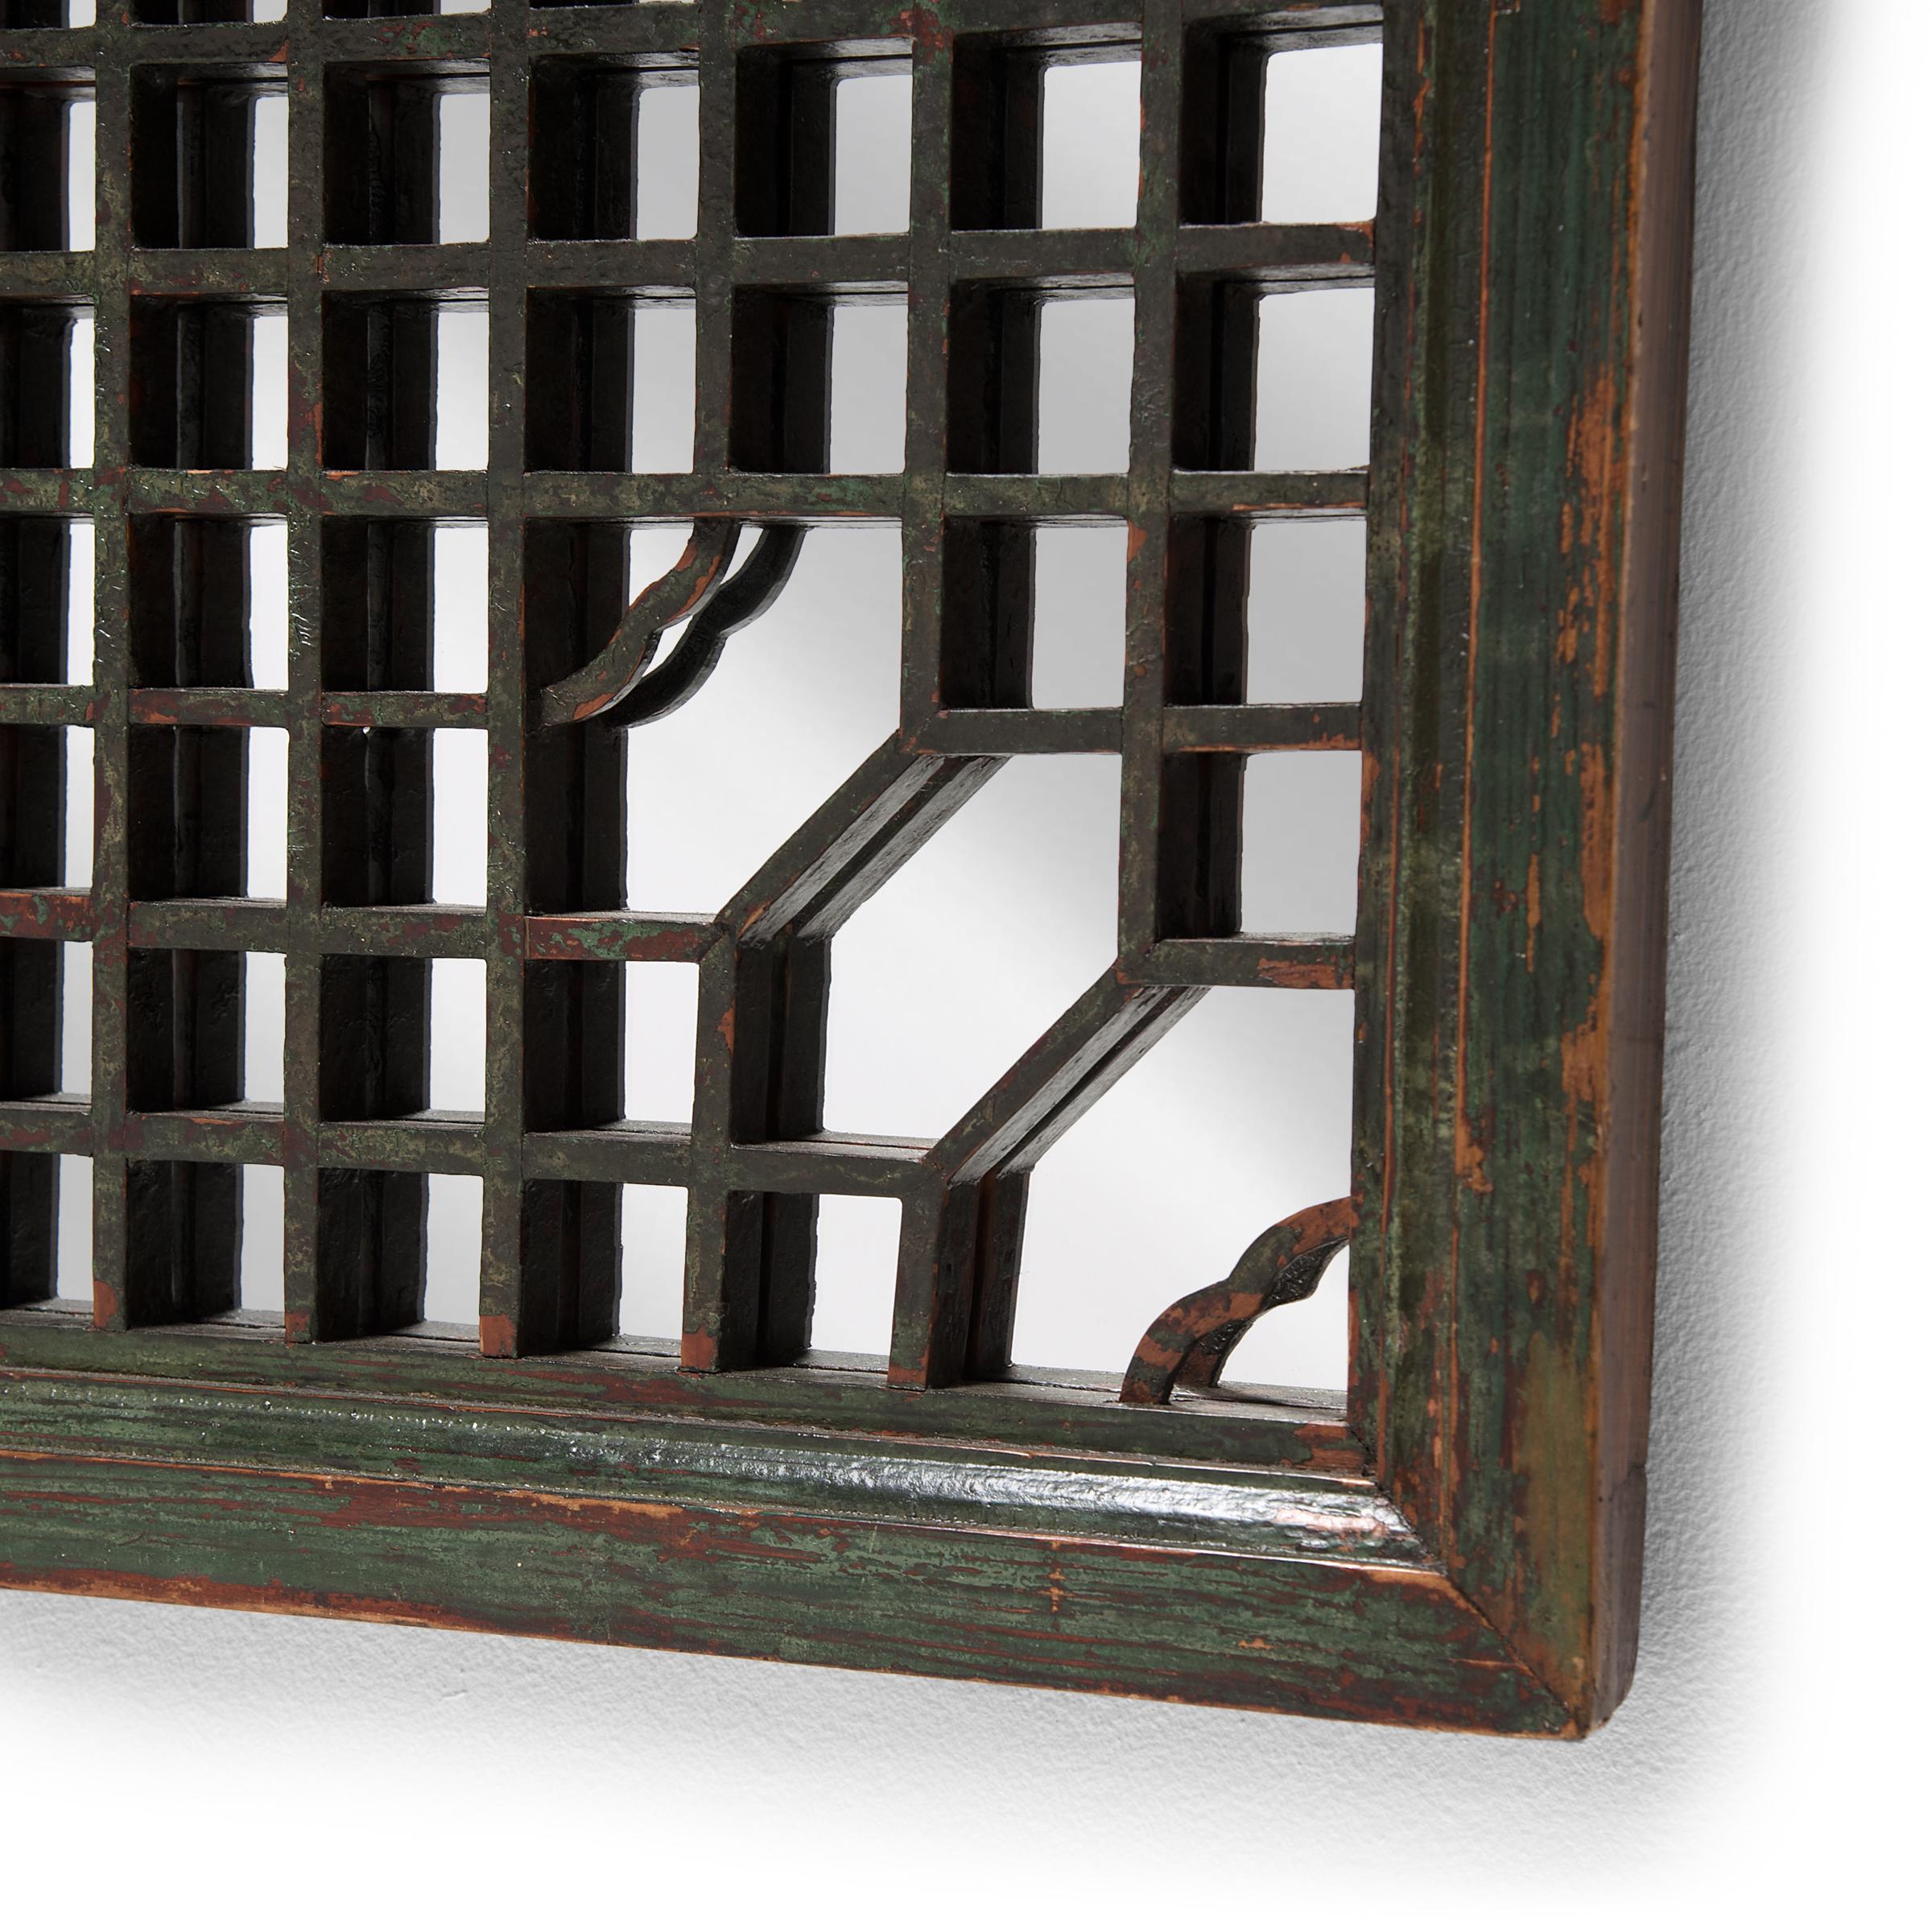 This lattice window panel likely originated in an aristocratic Chinese home with neutral and balanced interiors. The geometric lattice pattern is linear and open, and was designed originally to allow light and air into a room while maintaining